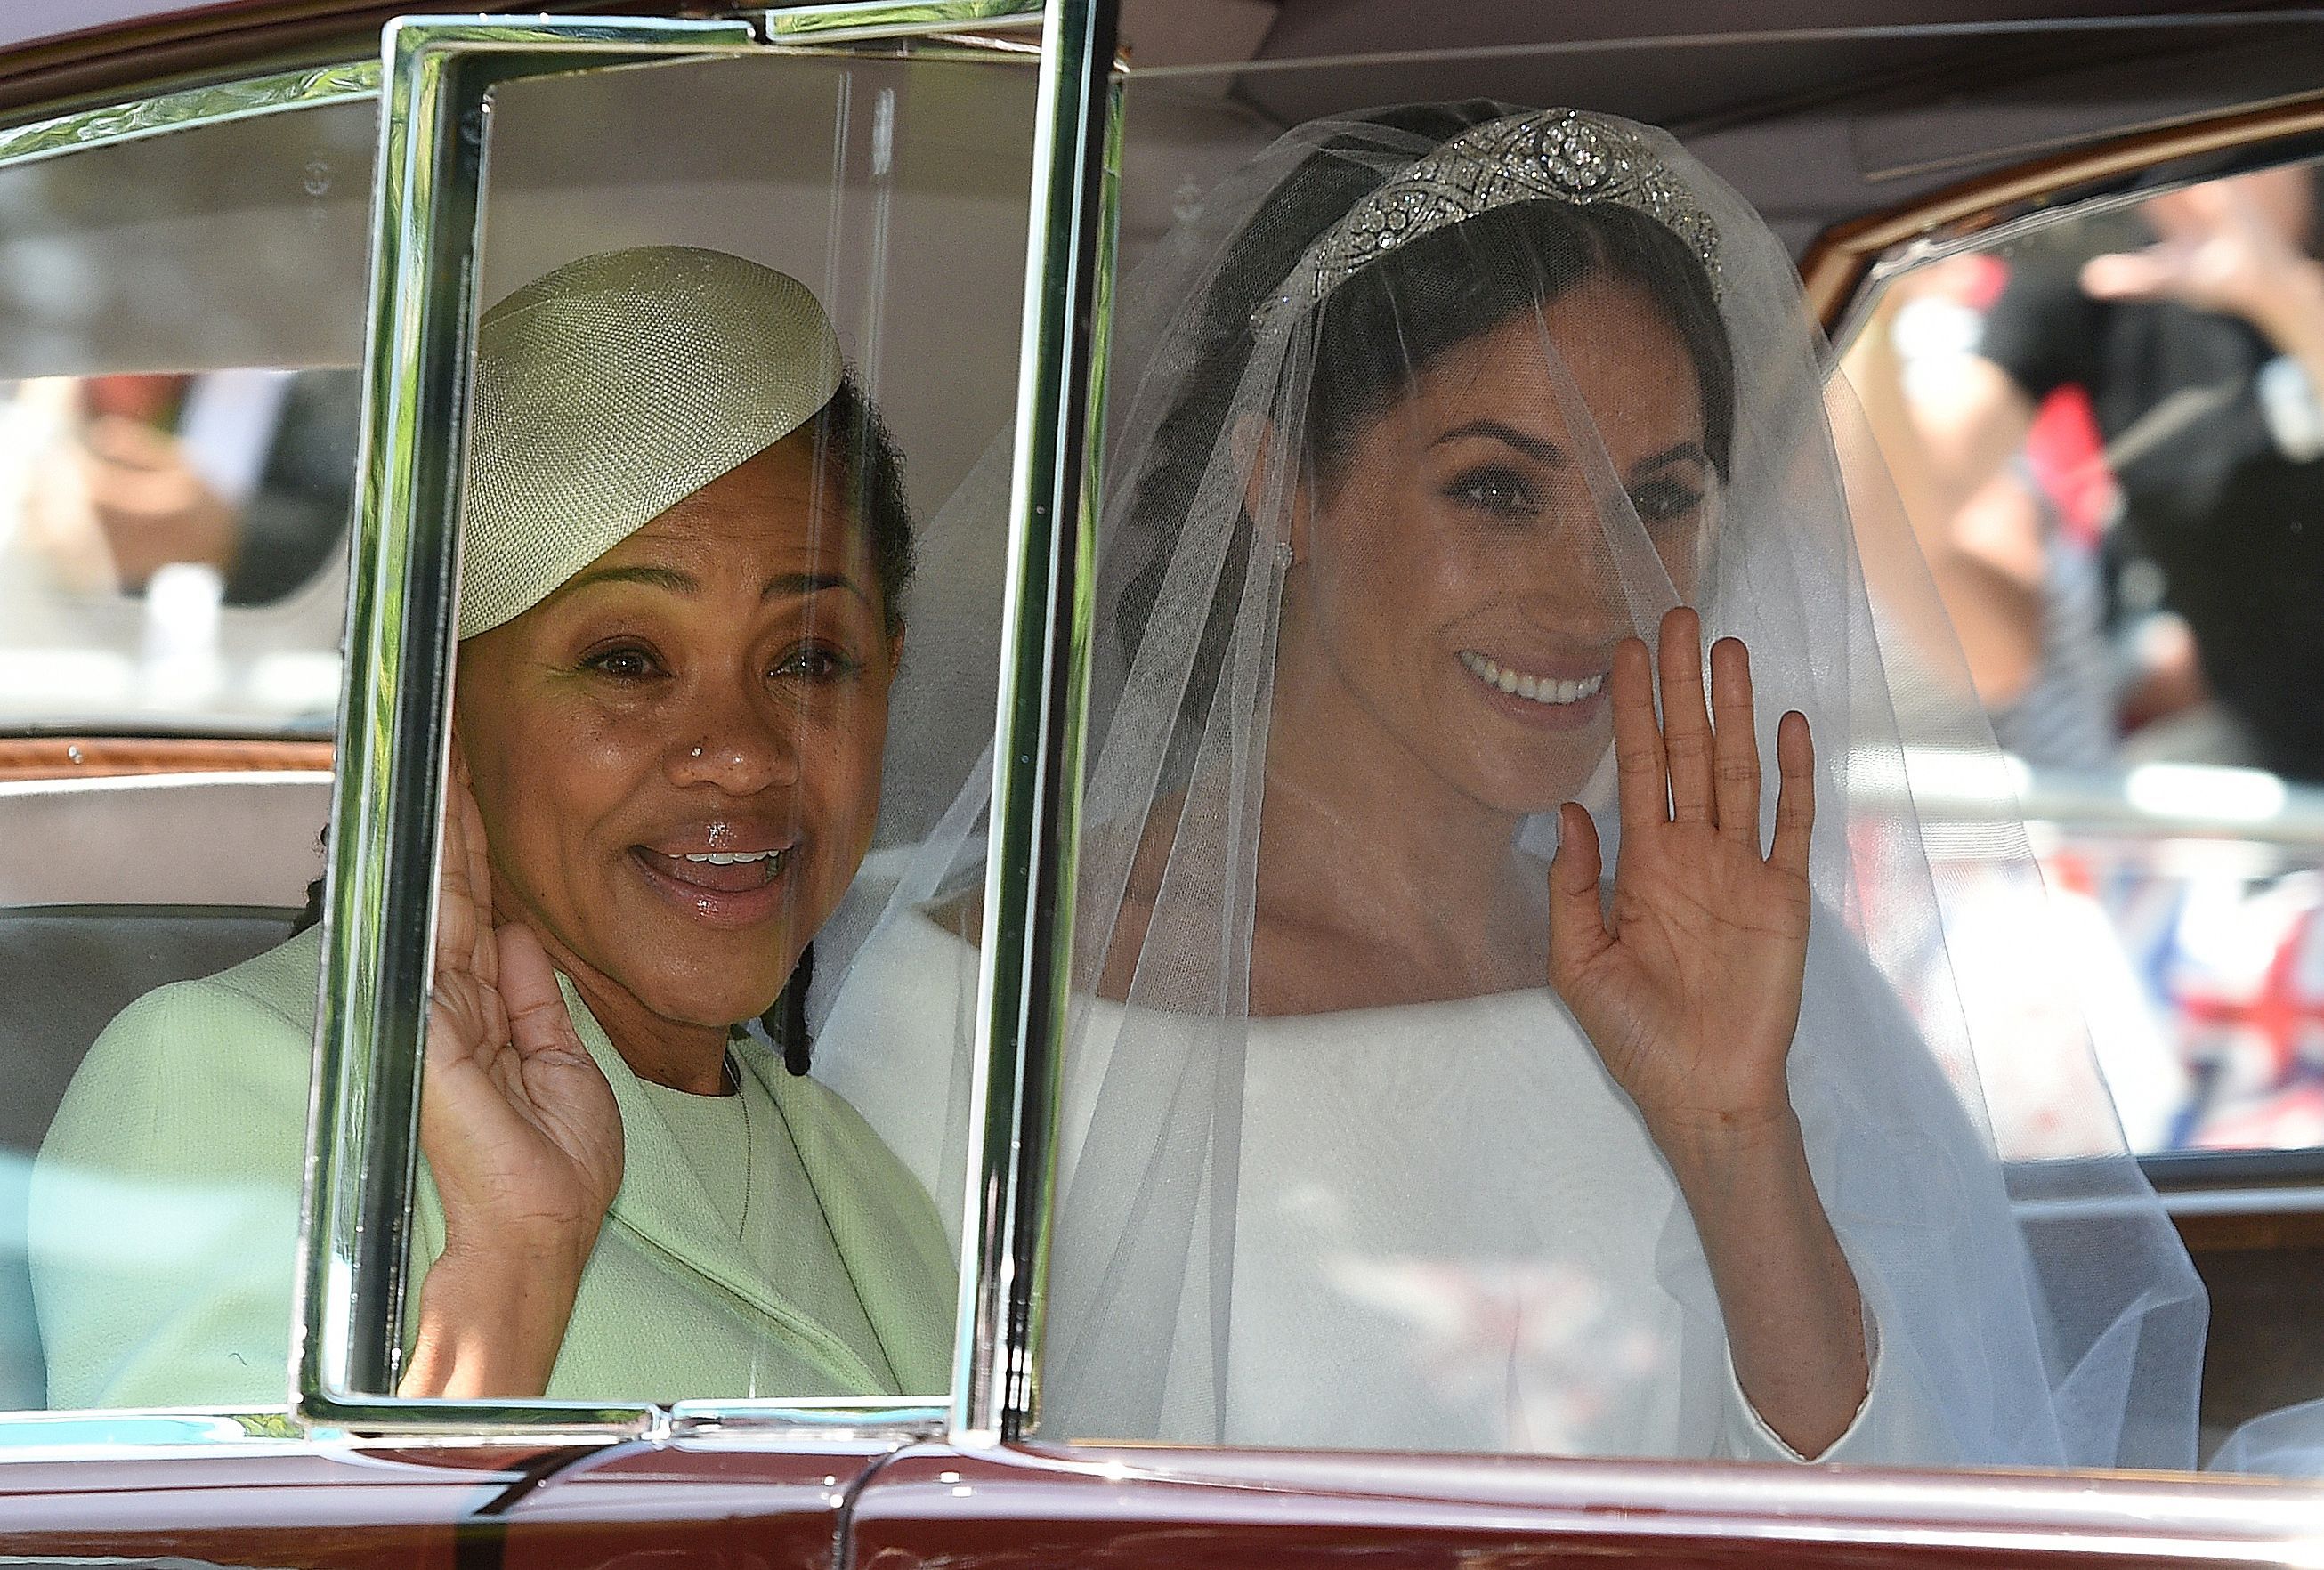 Meghan Markle and her mother, Doria Ragland, at her wedding ceremony at St George's Chapel, Windsor Castle on May 19, 2018. | Source: Oli SCARFF/AFP/Getty Images